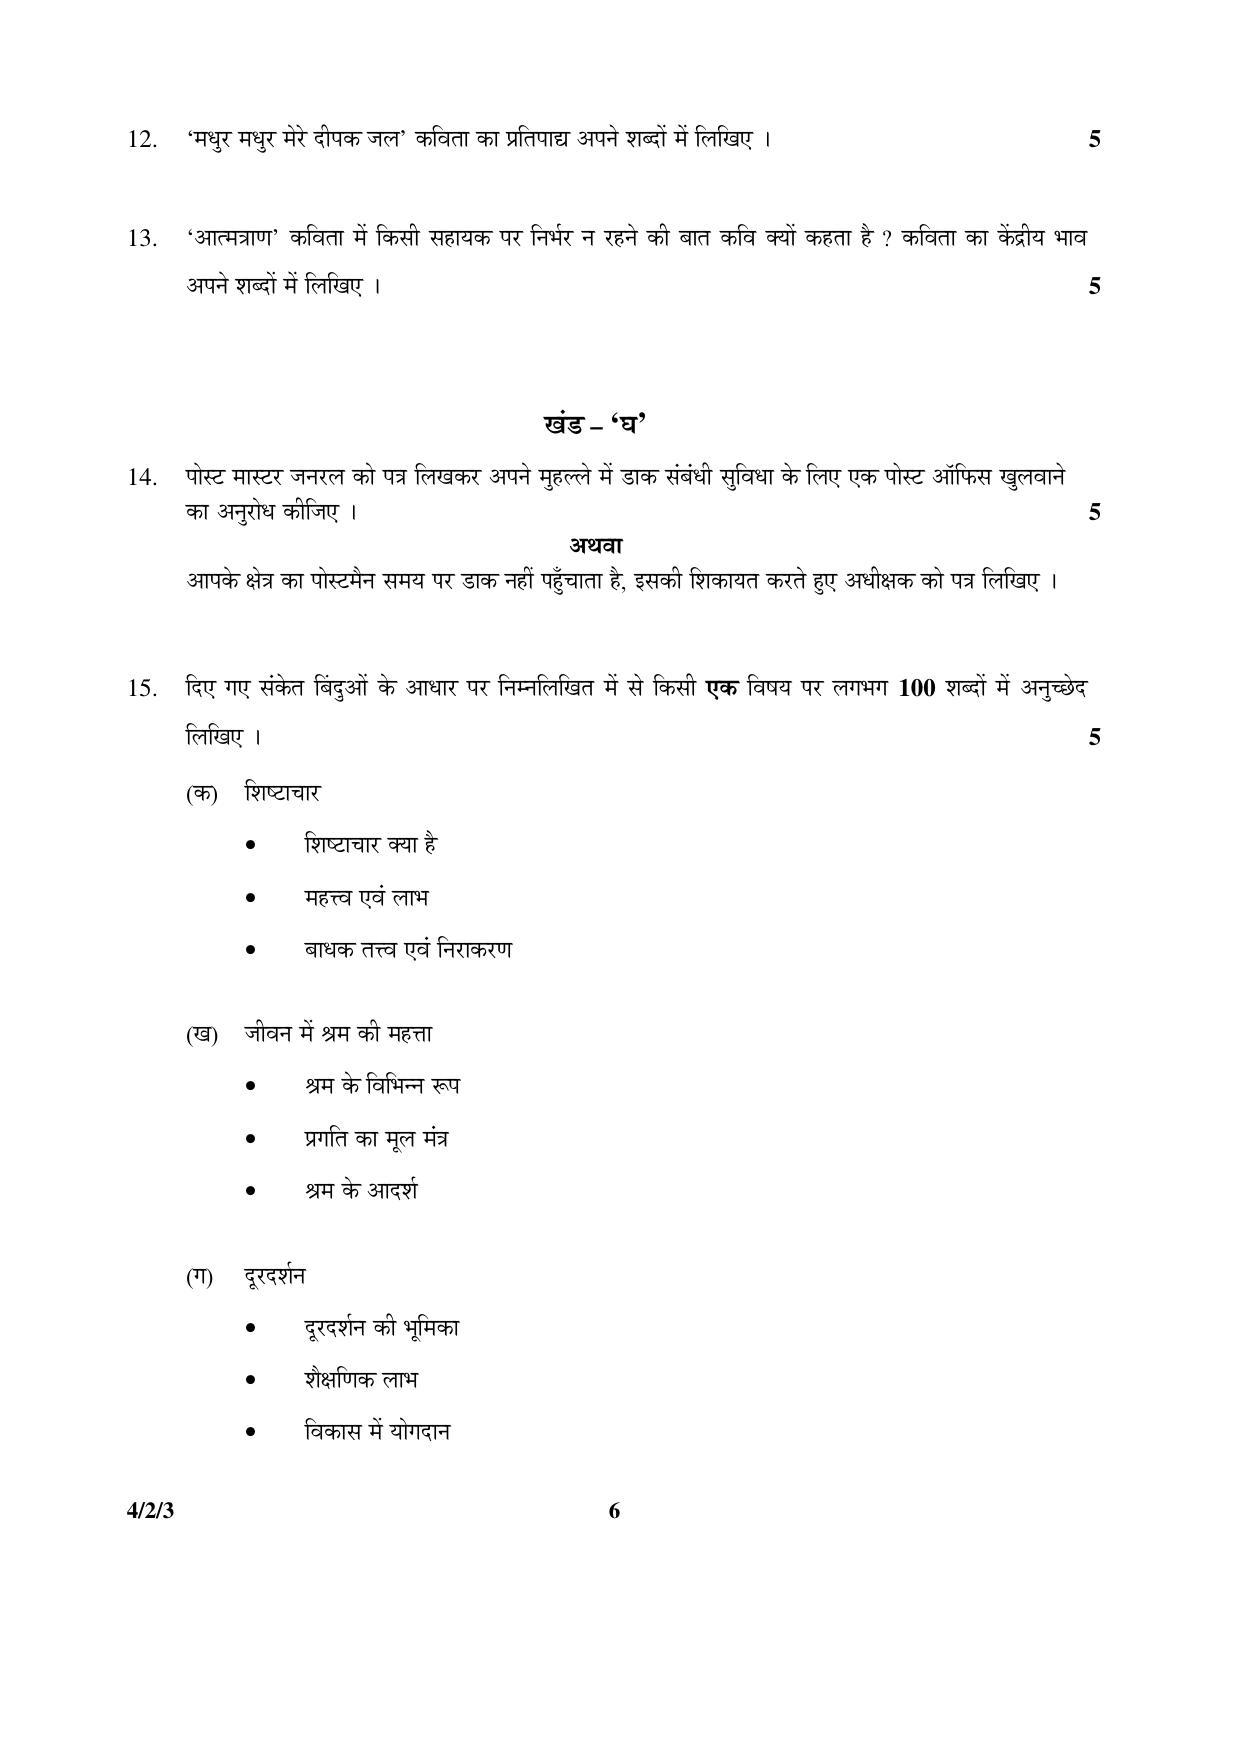 CBSE Class 10 4-2-3  Hindi - B 2016 Question Paper - Page 6